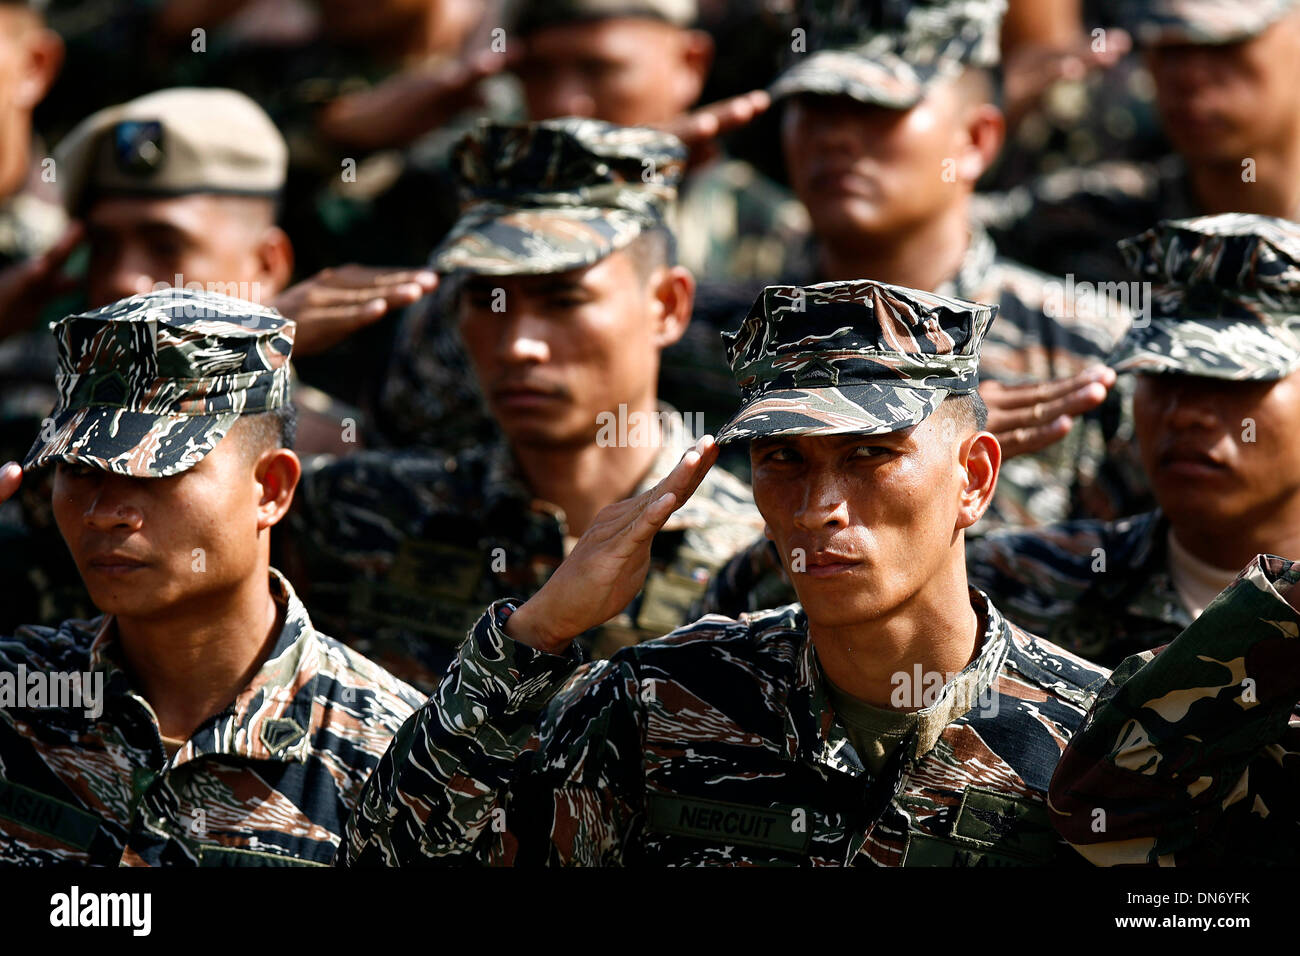 Quezon City, Philippines. 20th Dec, 2013. Soldiers from the Armed Forces of the Philippines (AFP) salute during the celebration of the 78th anniversary of AFP at Camp Aguinaldo in Quezon City, the Philippines, Dec. 20, 2013. Credit:  Rouelle Umali/Xinhua/Alamy Live News Stock Photo